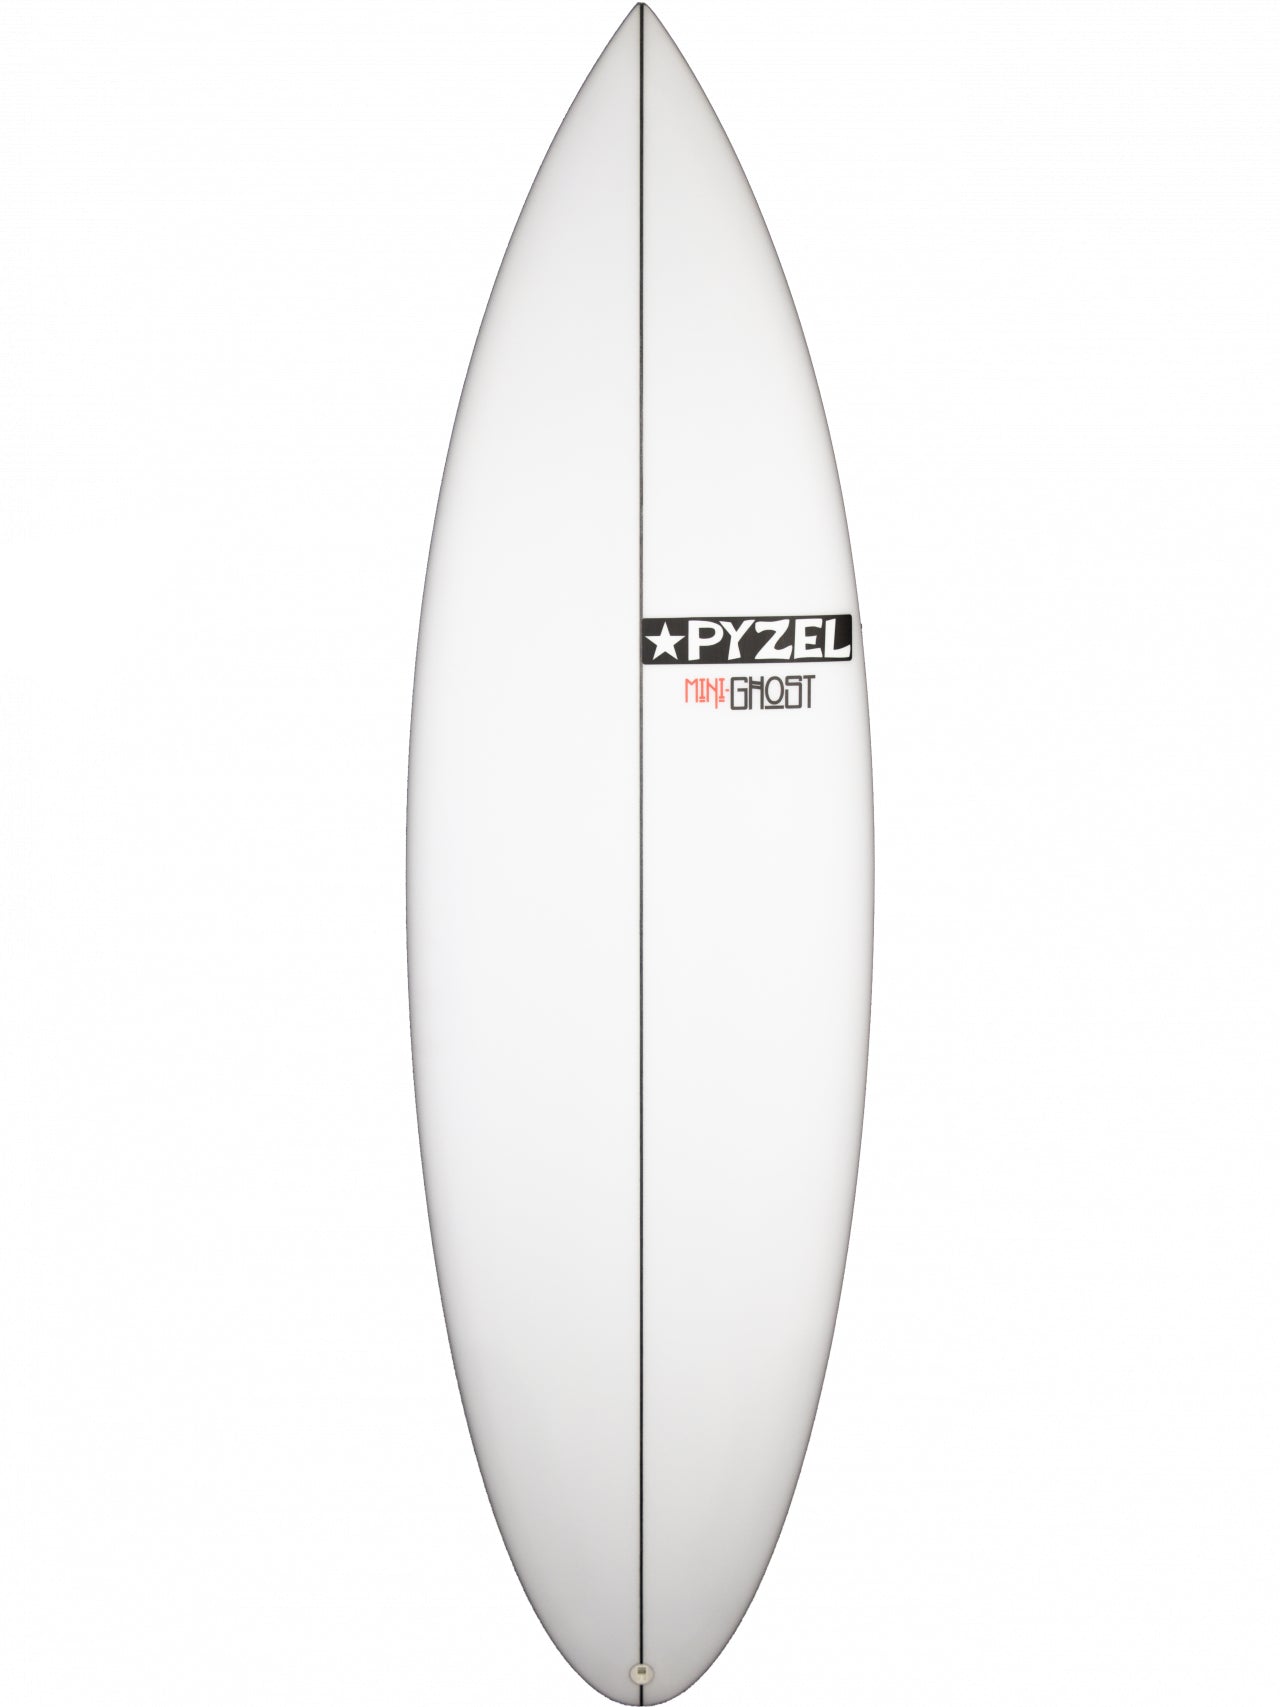 Pyzel Mini Ghost 5ft5in, Used